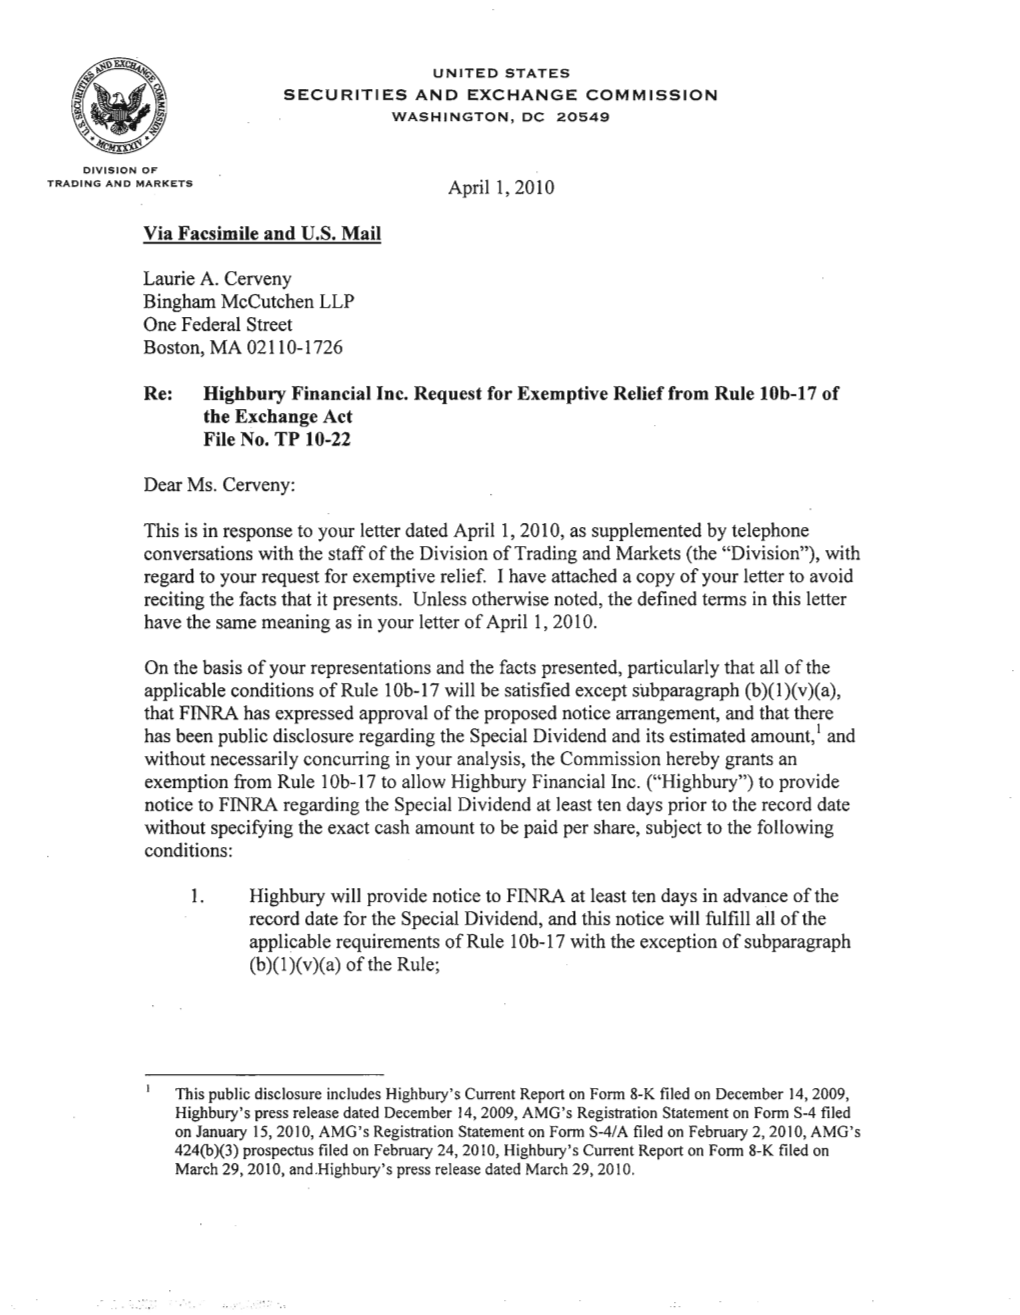 Highbury Financial Inc. Request for Exemptive Relief from Rule 10B-17 of the Exchange Act File No